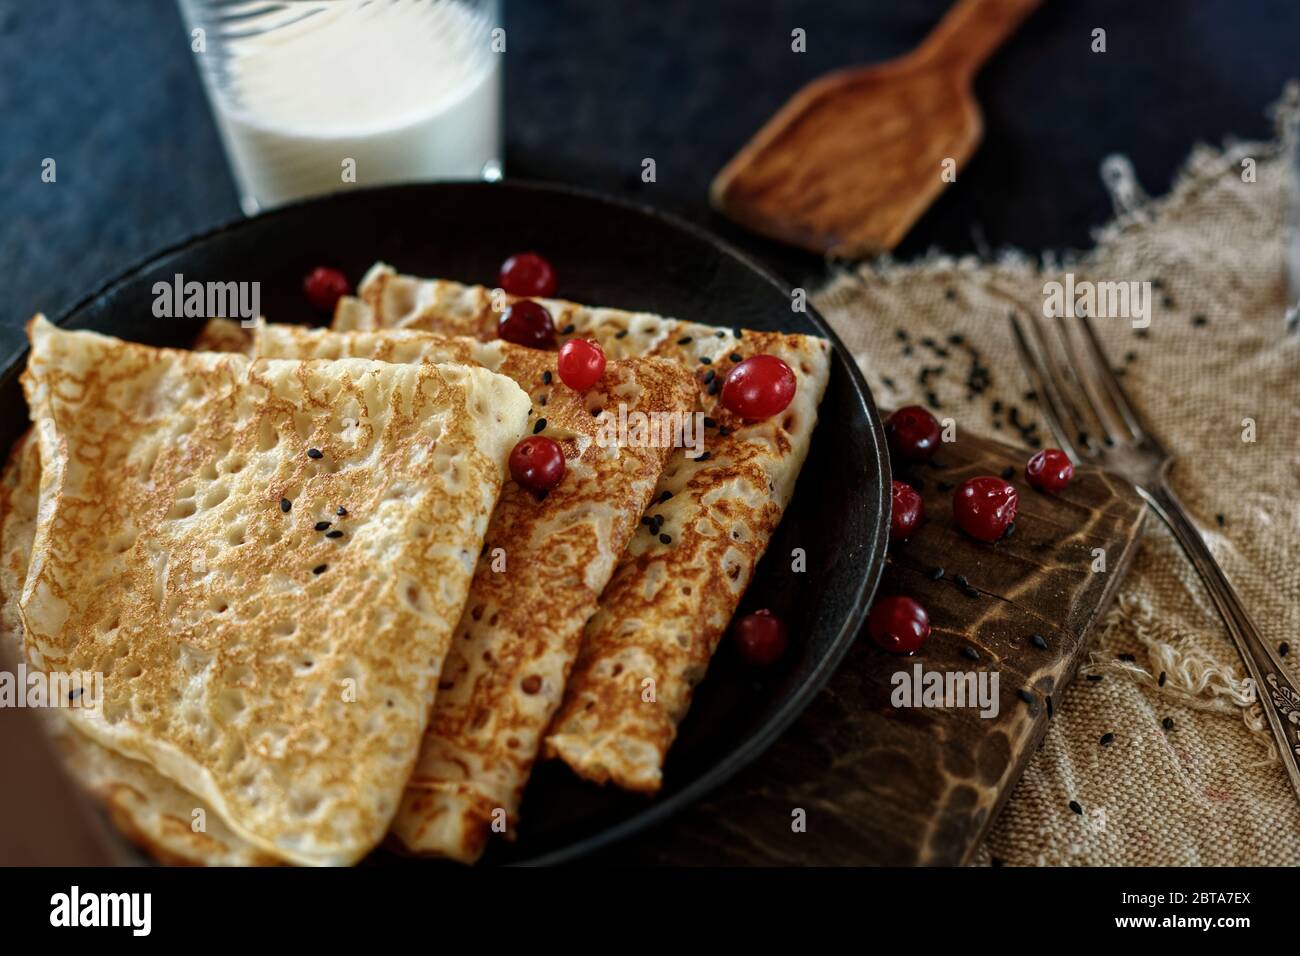 Delicious home-cooked food. Pancakes in a frying pan with cranberry berries and milk. Rustic style Stock Photo